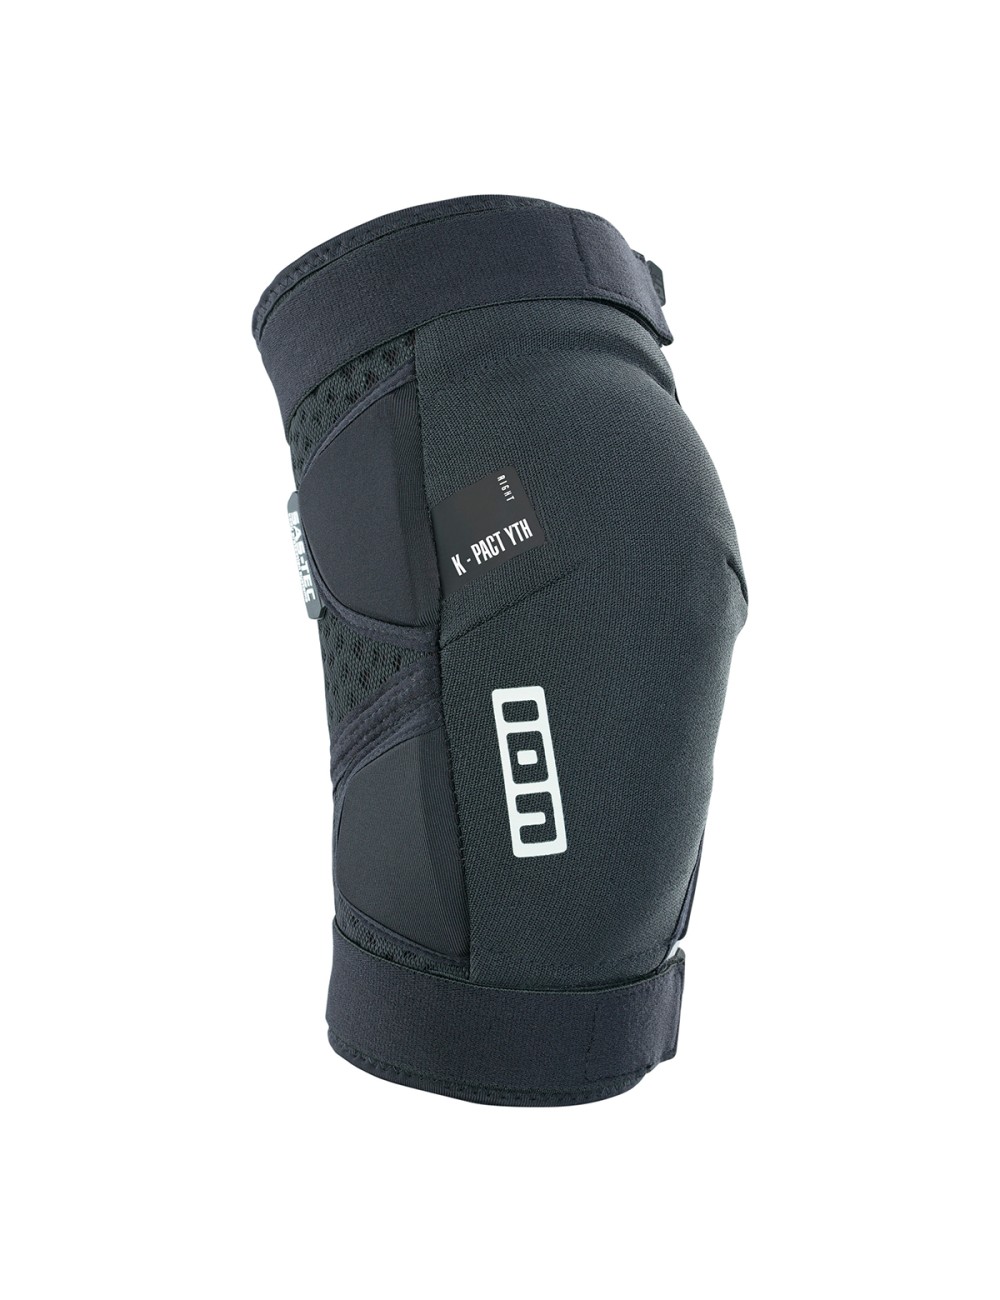 ION Youth Knee Pads Pact Protector - Black